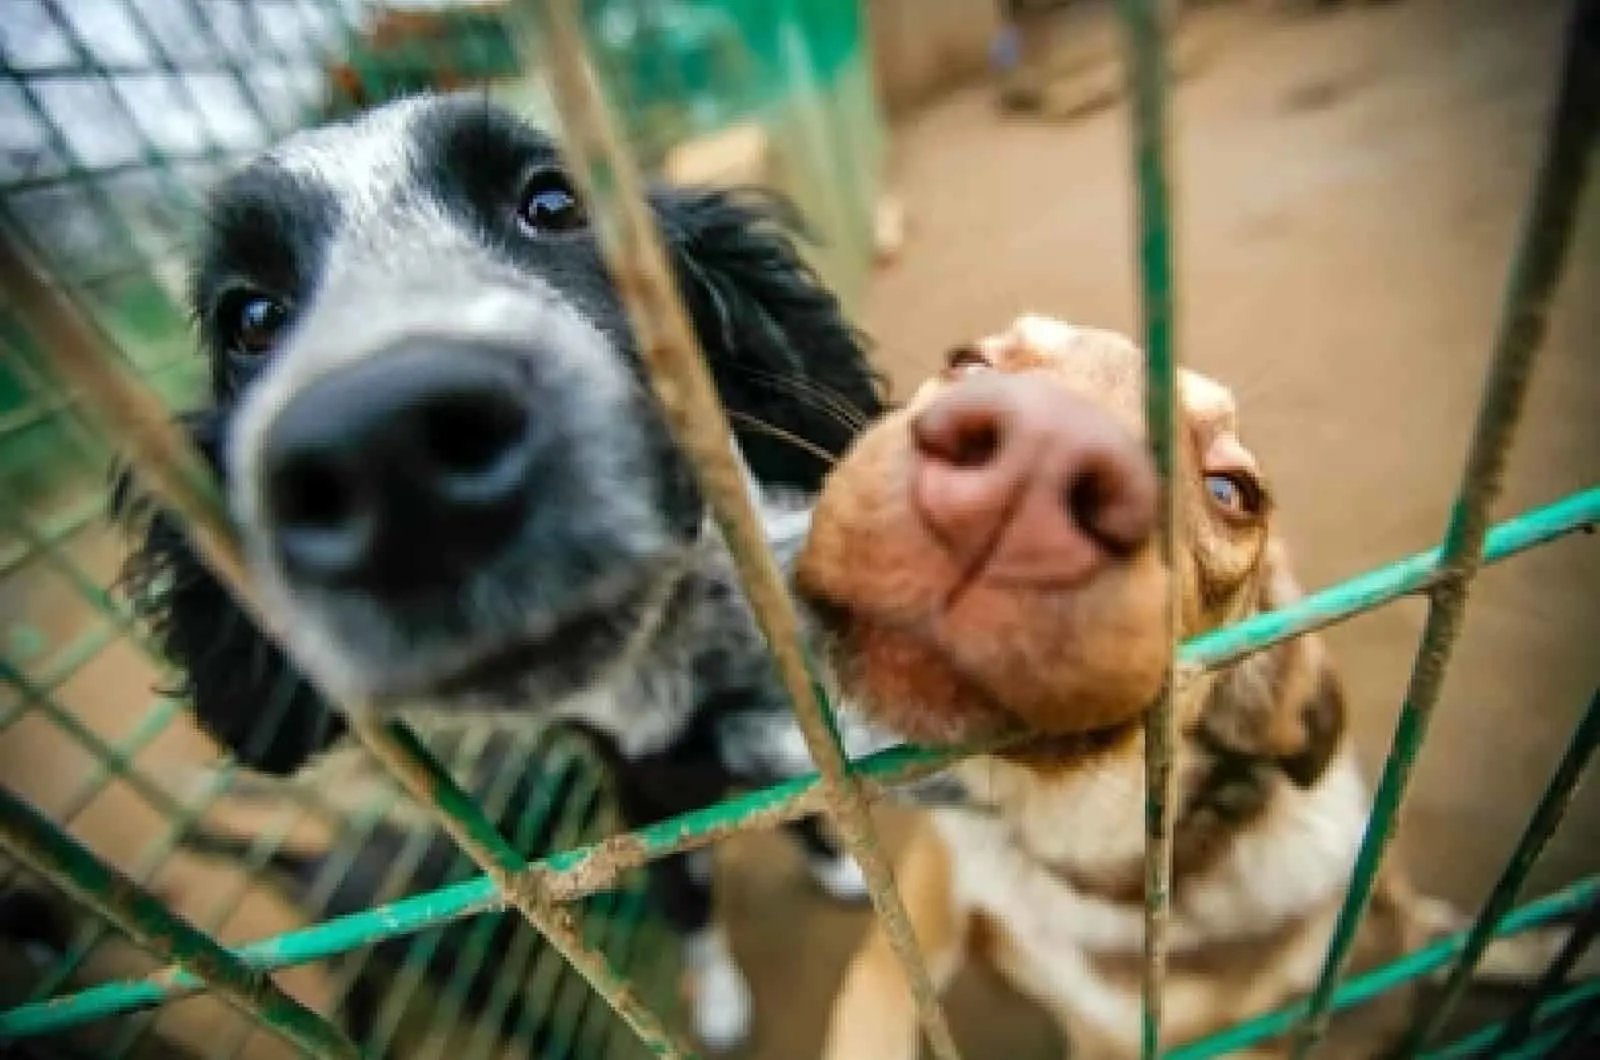 Dogs in an animal shelter waiting to be adopted.